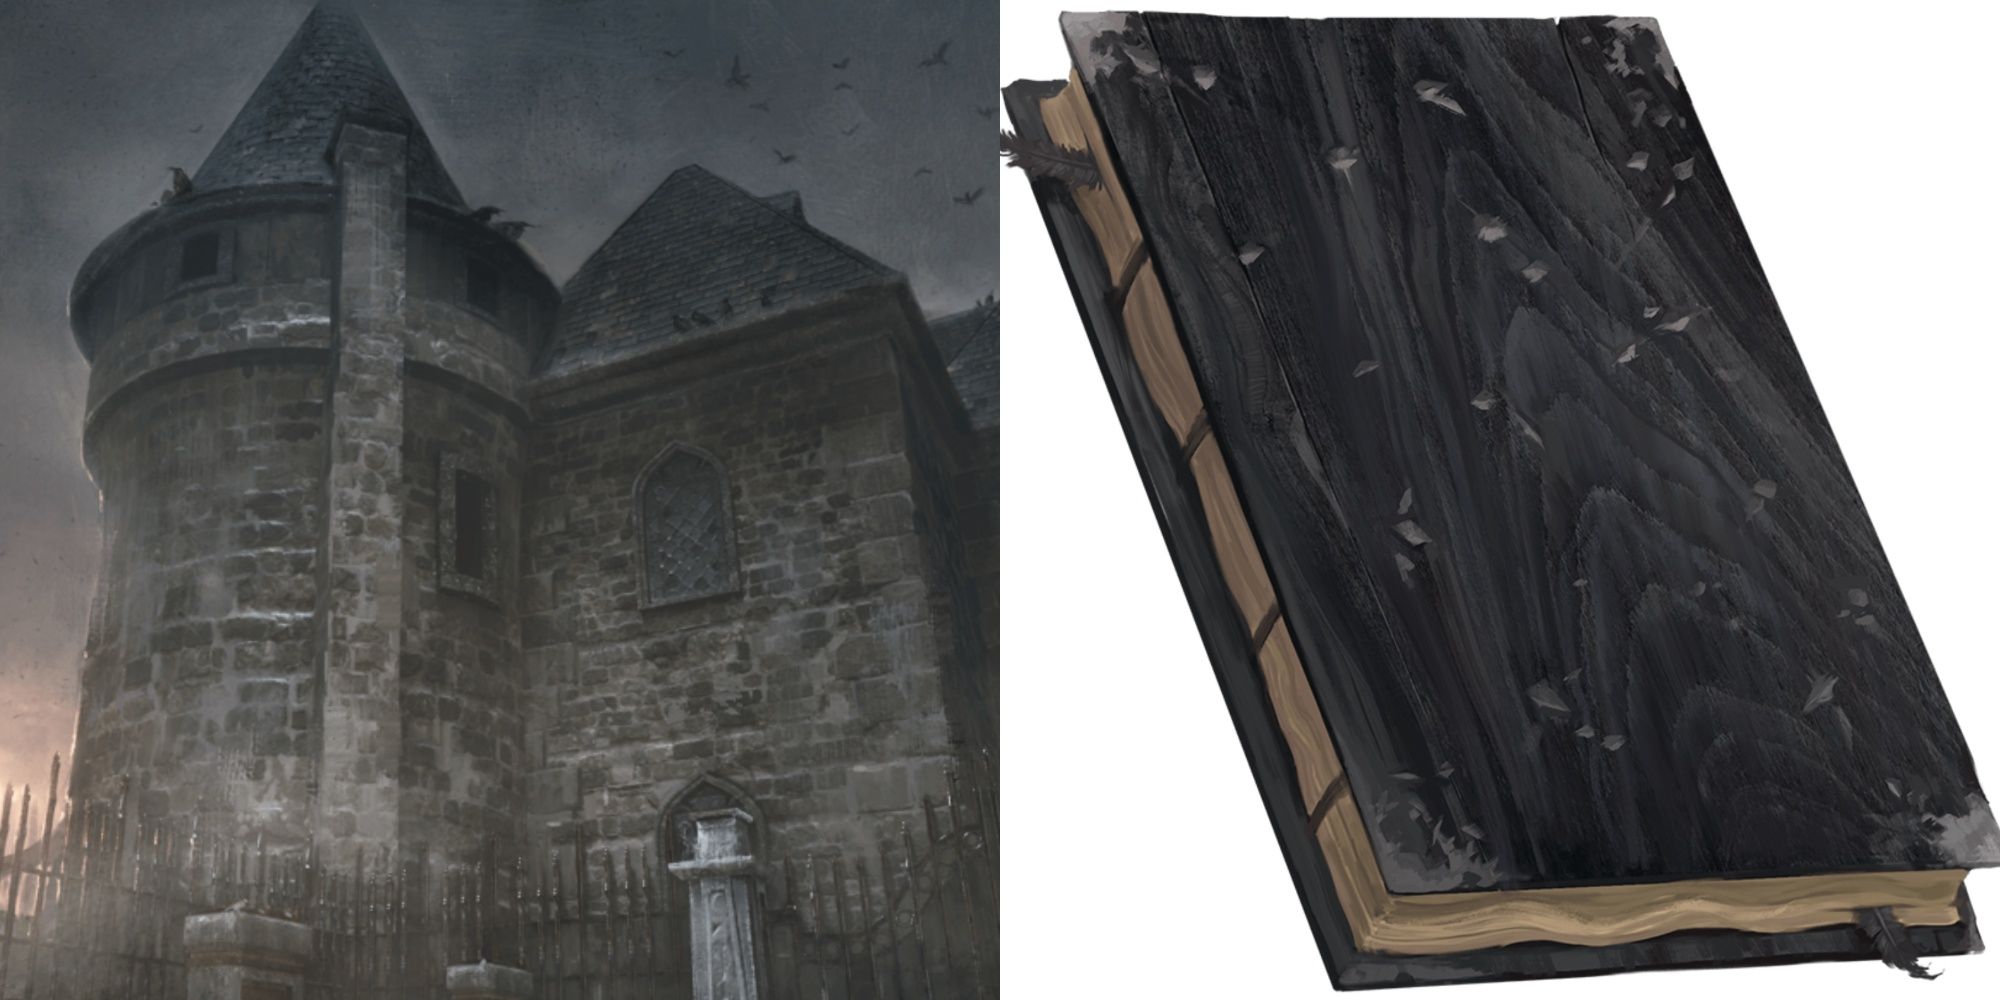 candlekeep mysterious official art via Wizards of the Coast the haunted manor and the book of the raven